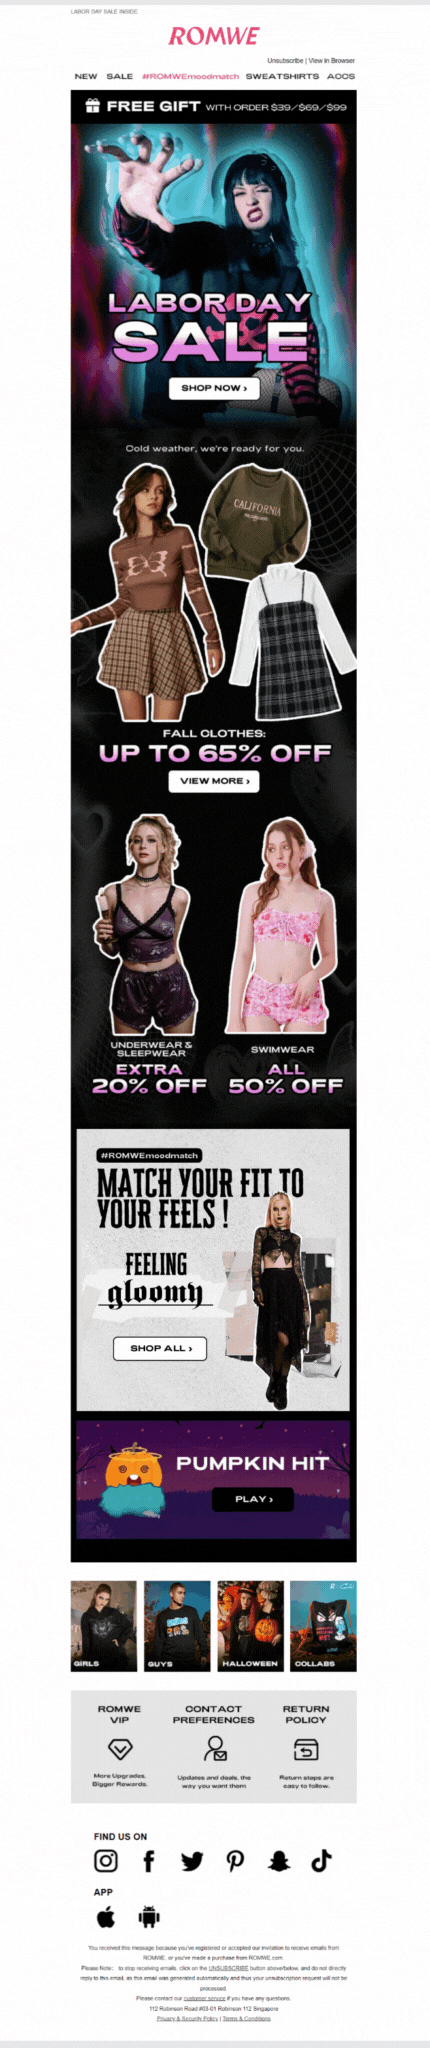 Labor Day email from Romwe that promotes fall clothes, swimsuits, and underwear with discounts. It also has a GIF that says “Match the fit to your feels”.